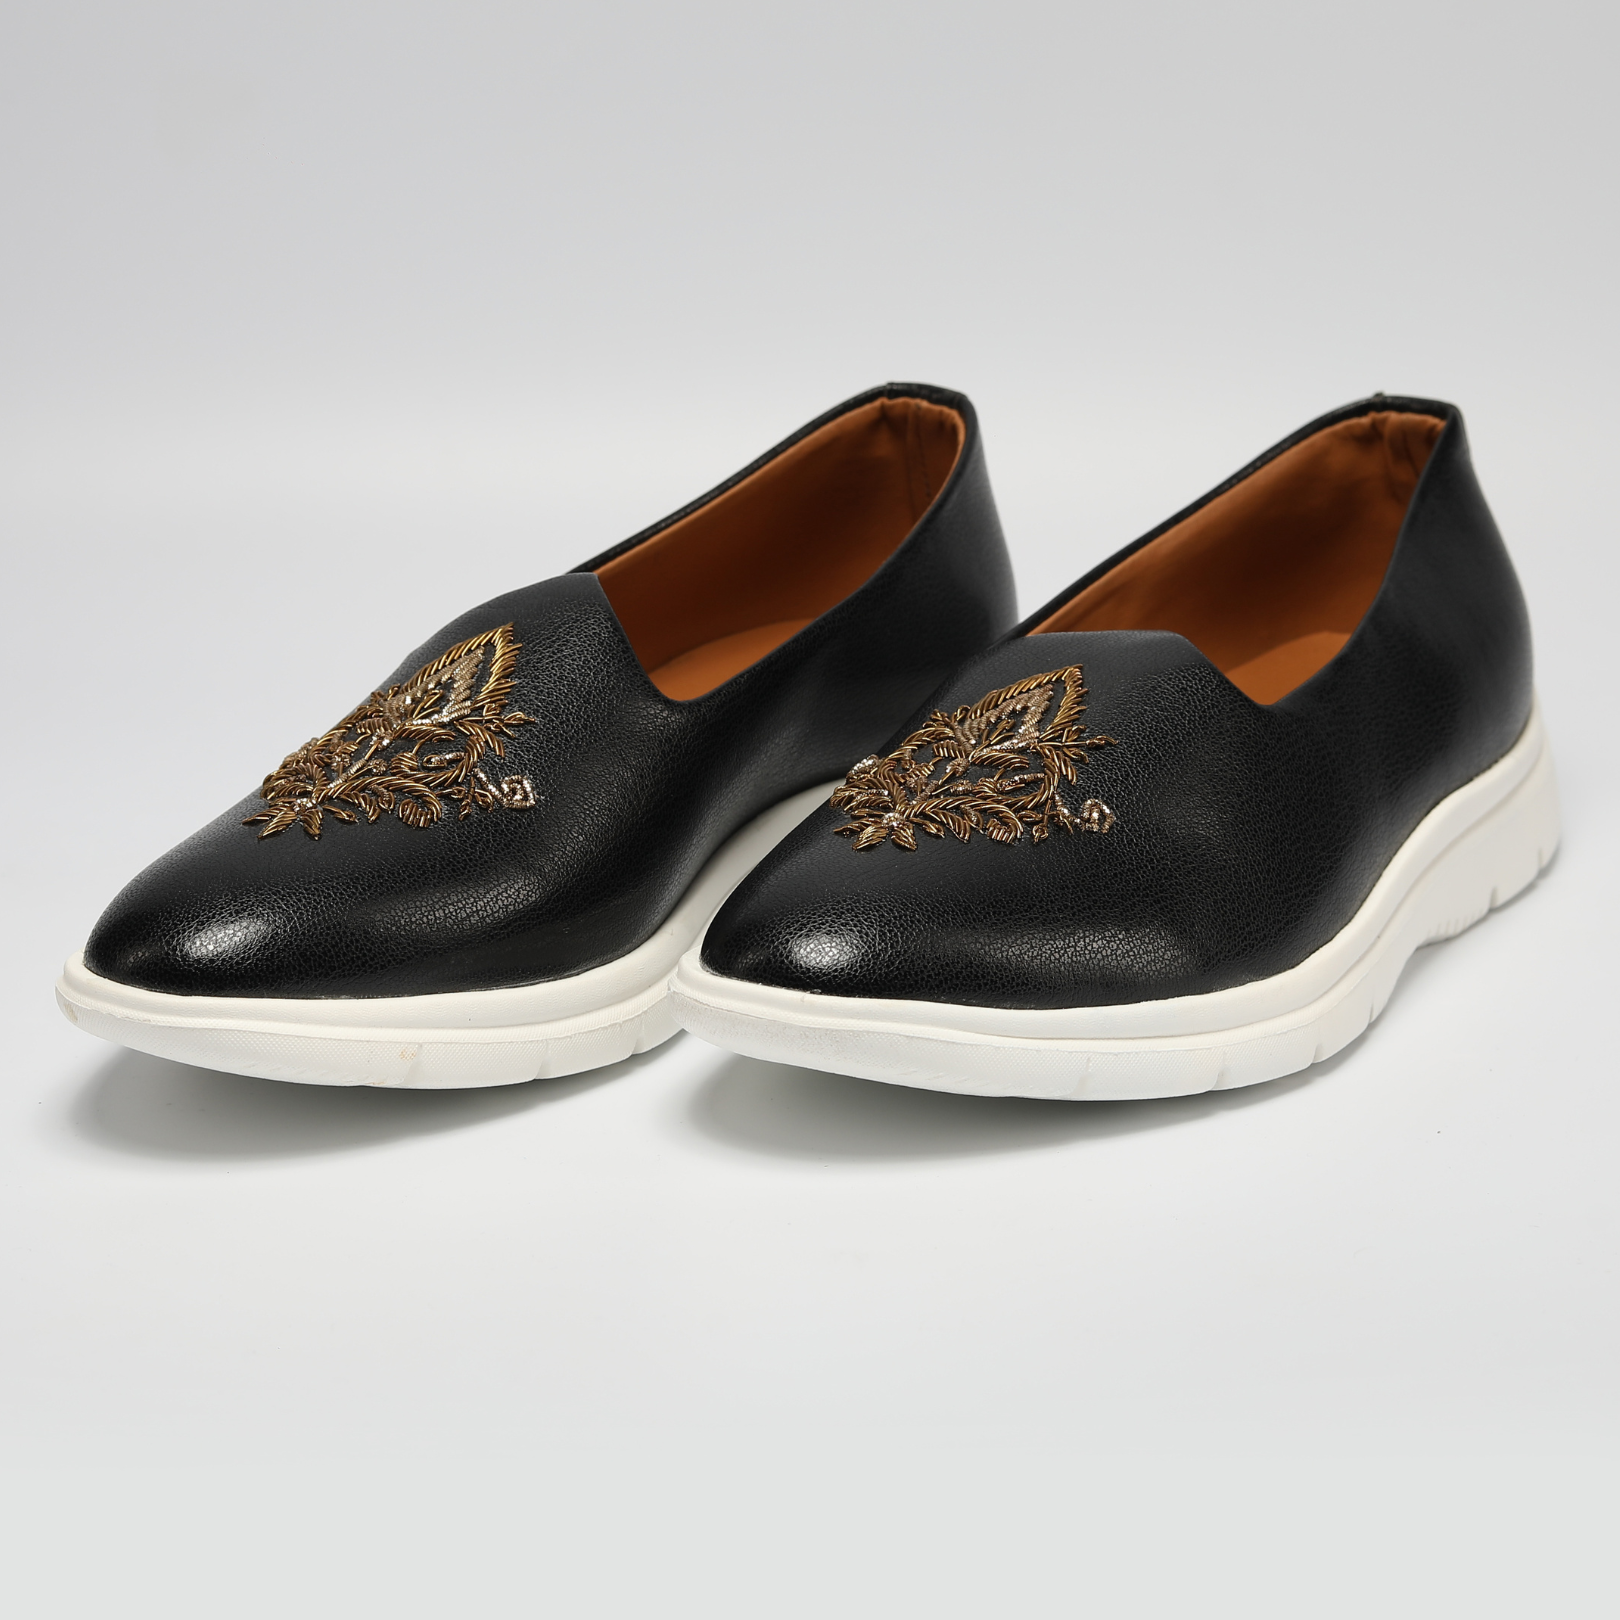 A black leather slip on shoe with gold embroidery, perfect for ethnic wear.